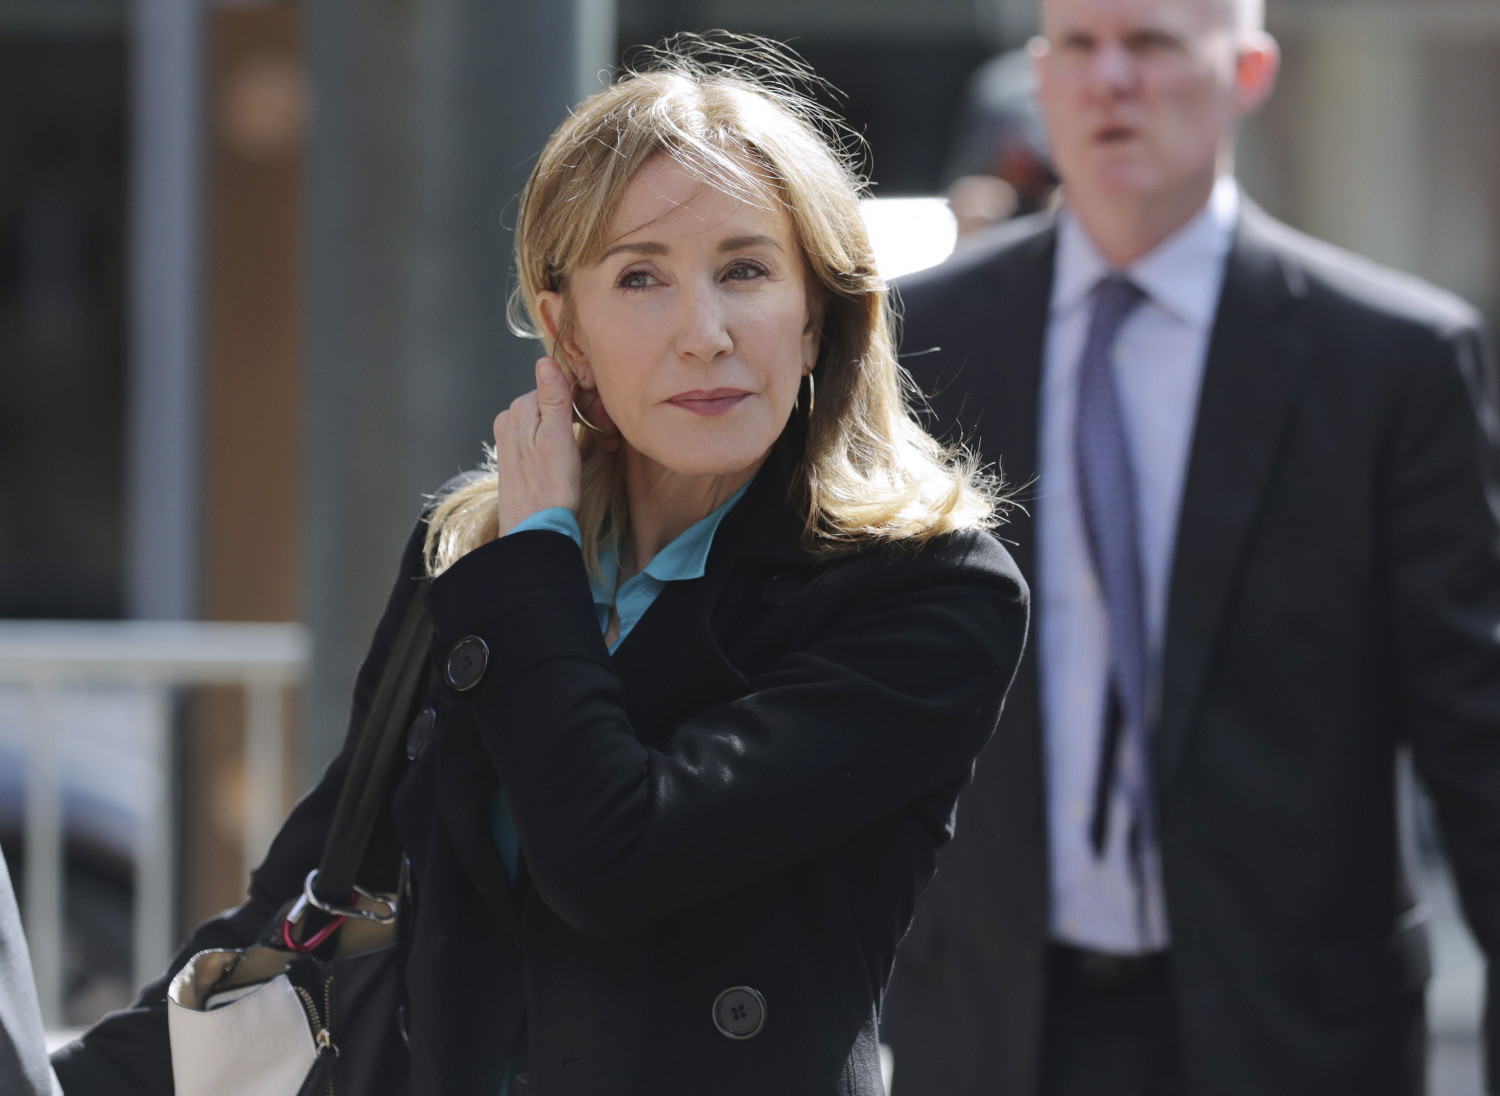 Before Her Sentencing, Felicity Huffman Says She Feels ‘Utter Shame’ for Her Role in the College Cheating Scandal